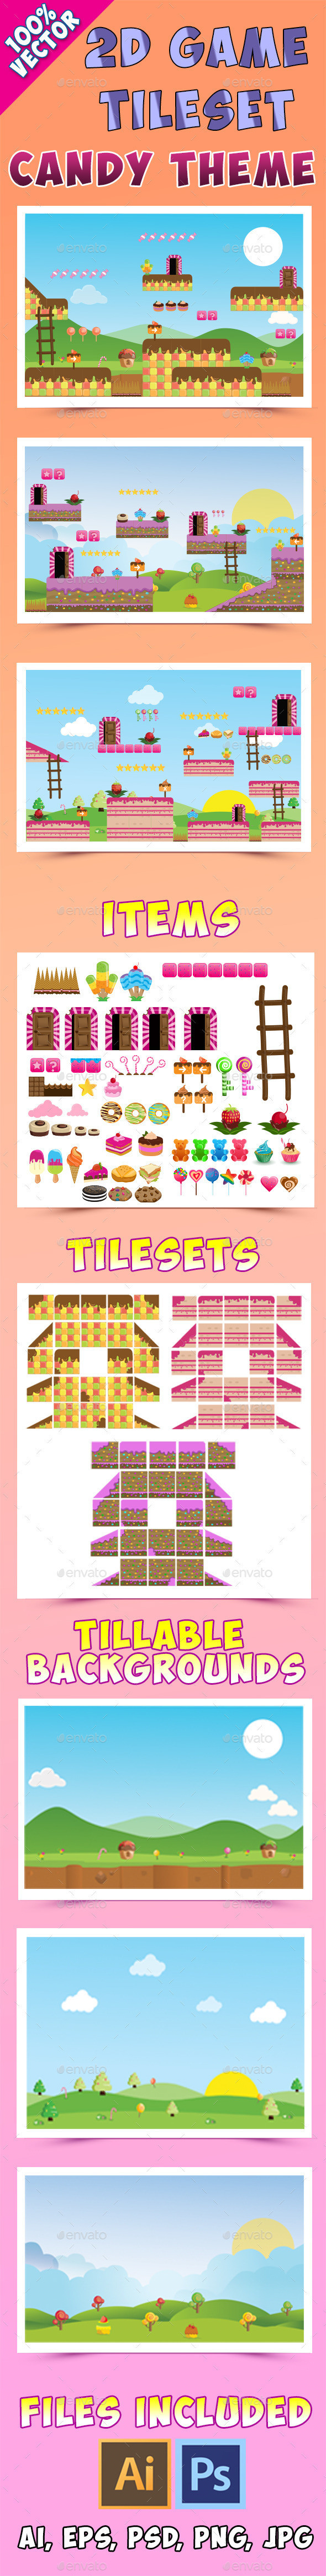 Candy theme tileset preview